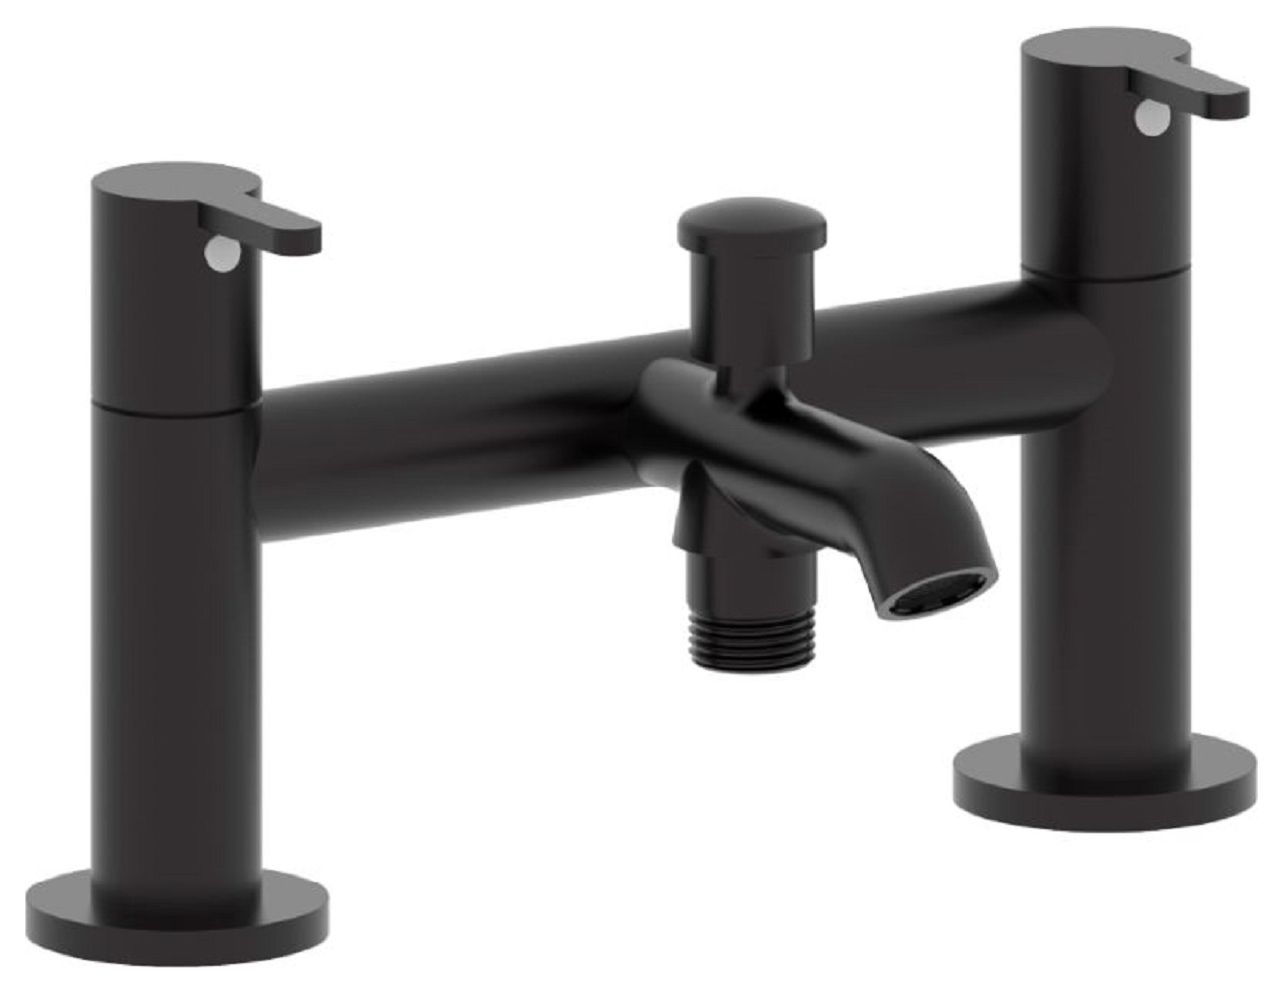 Image of Roca Carelia Bath Shower Mixer Tap with Cold Start Technology - Black